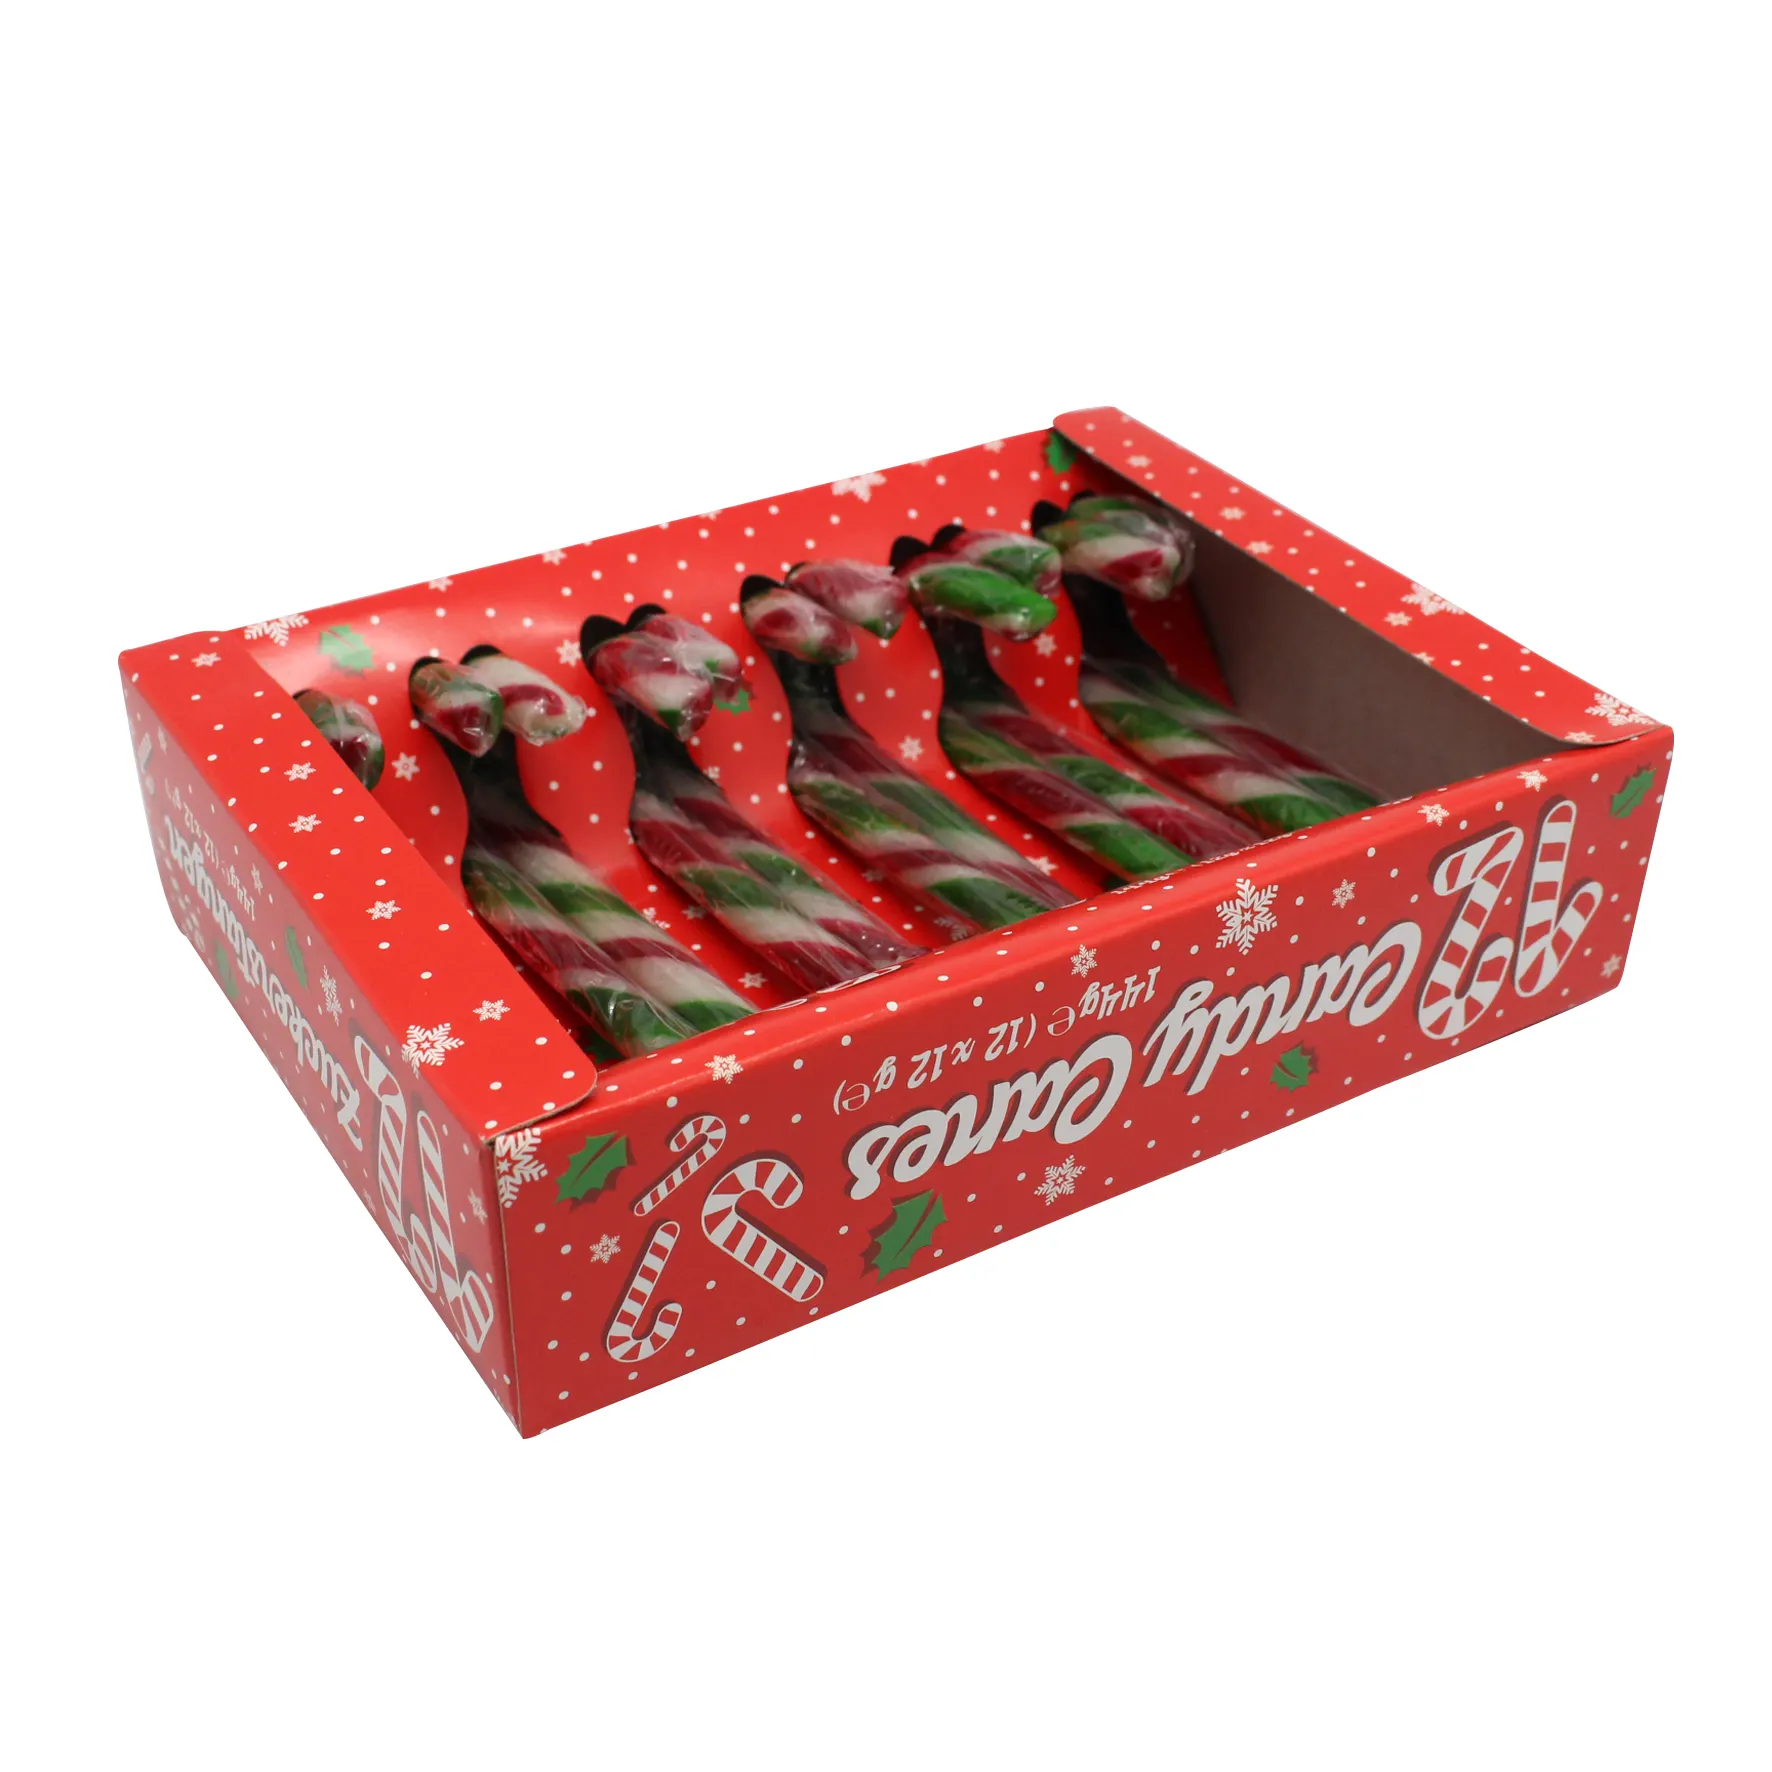 Sweet Flash 12x12g Candy Canes Display Box red-white-green Xmas Canes Box High Quality Premium Product 2022 NEW